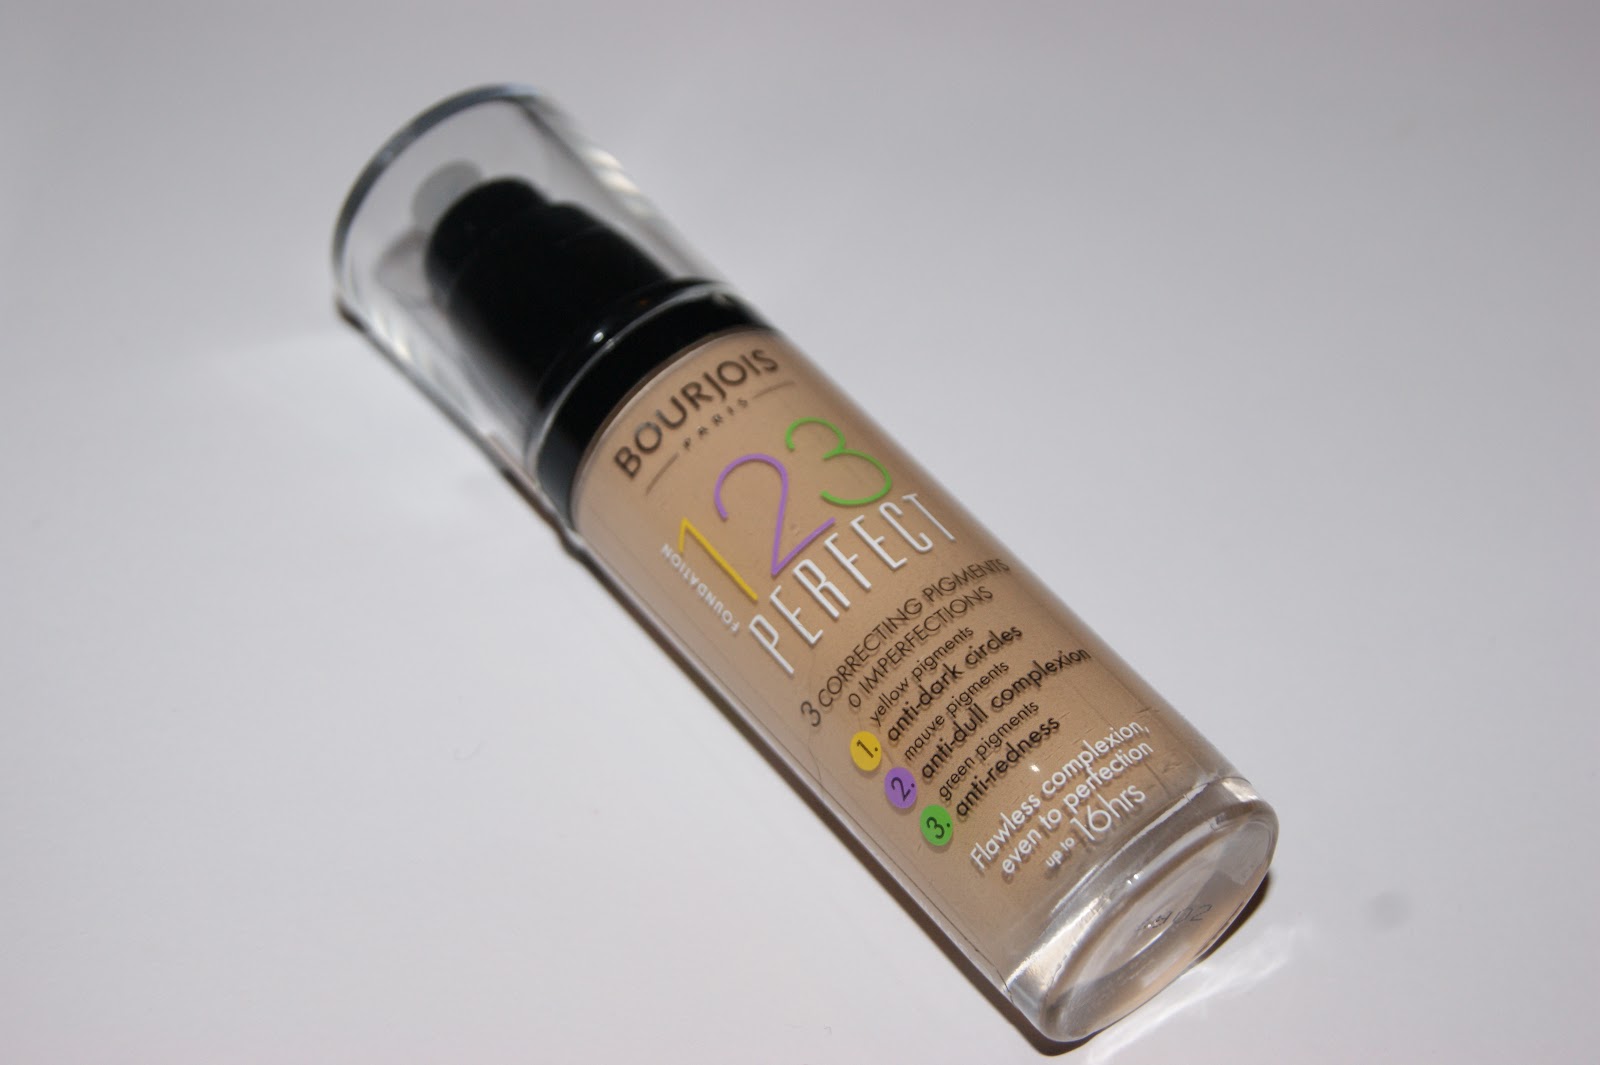 Bourjois 123 Perfect Foundation - Review | The Sunday Girl